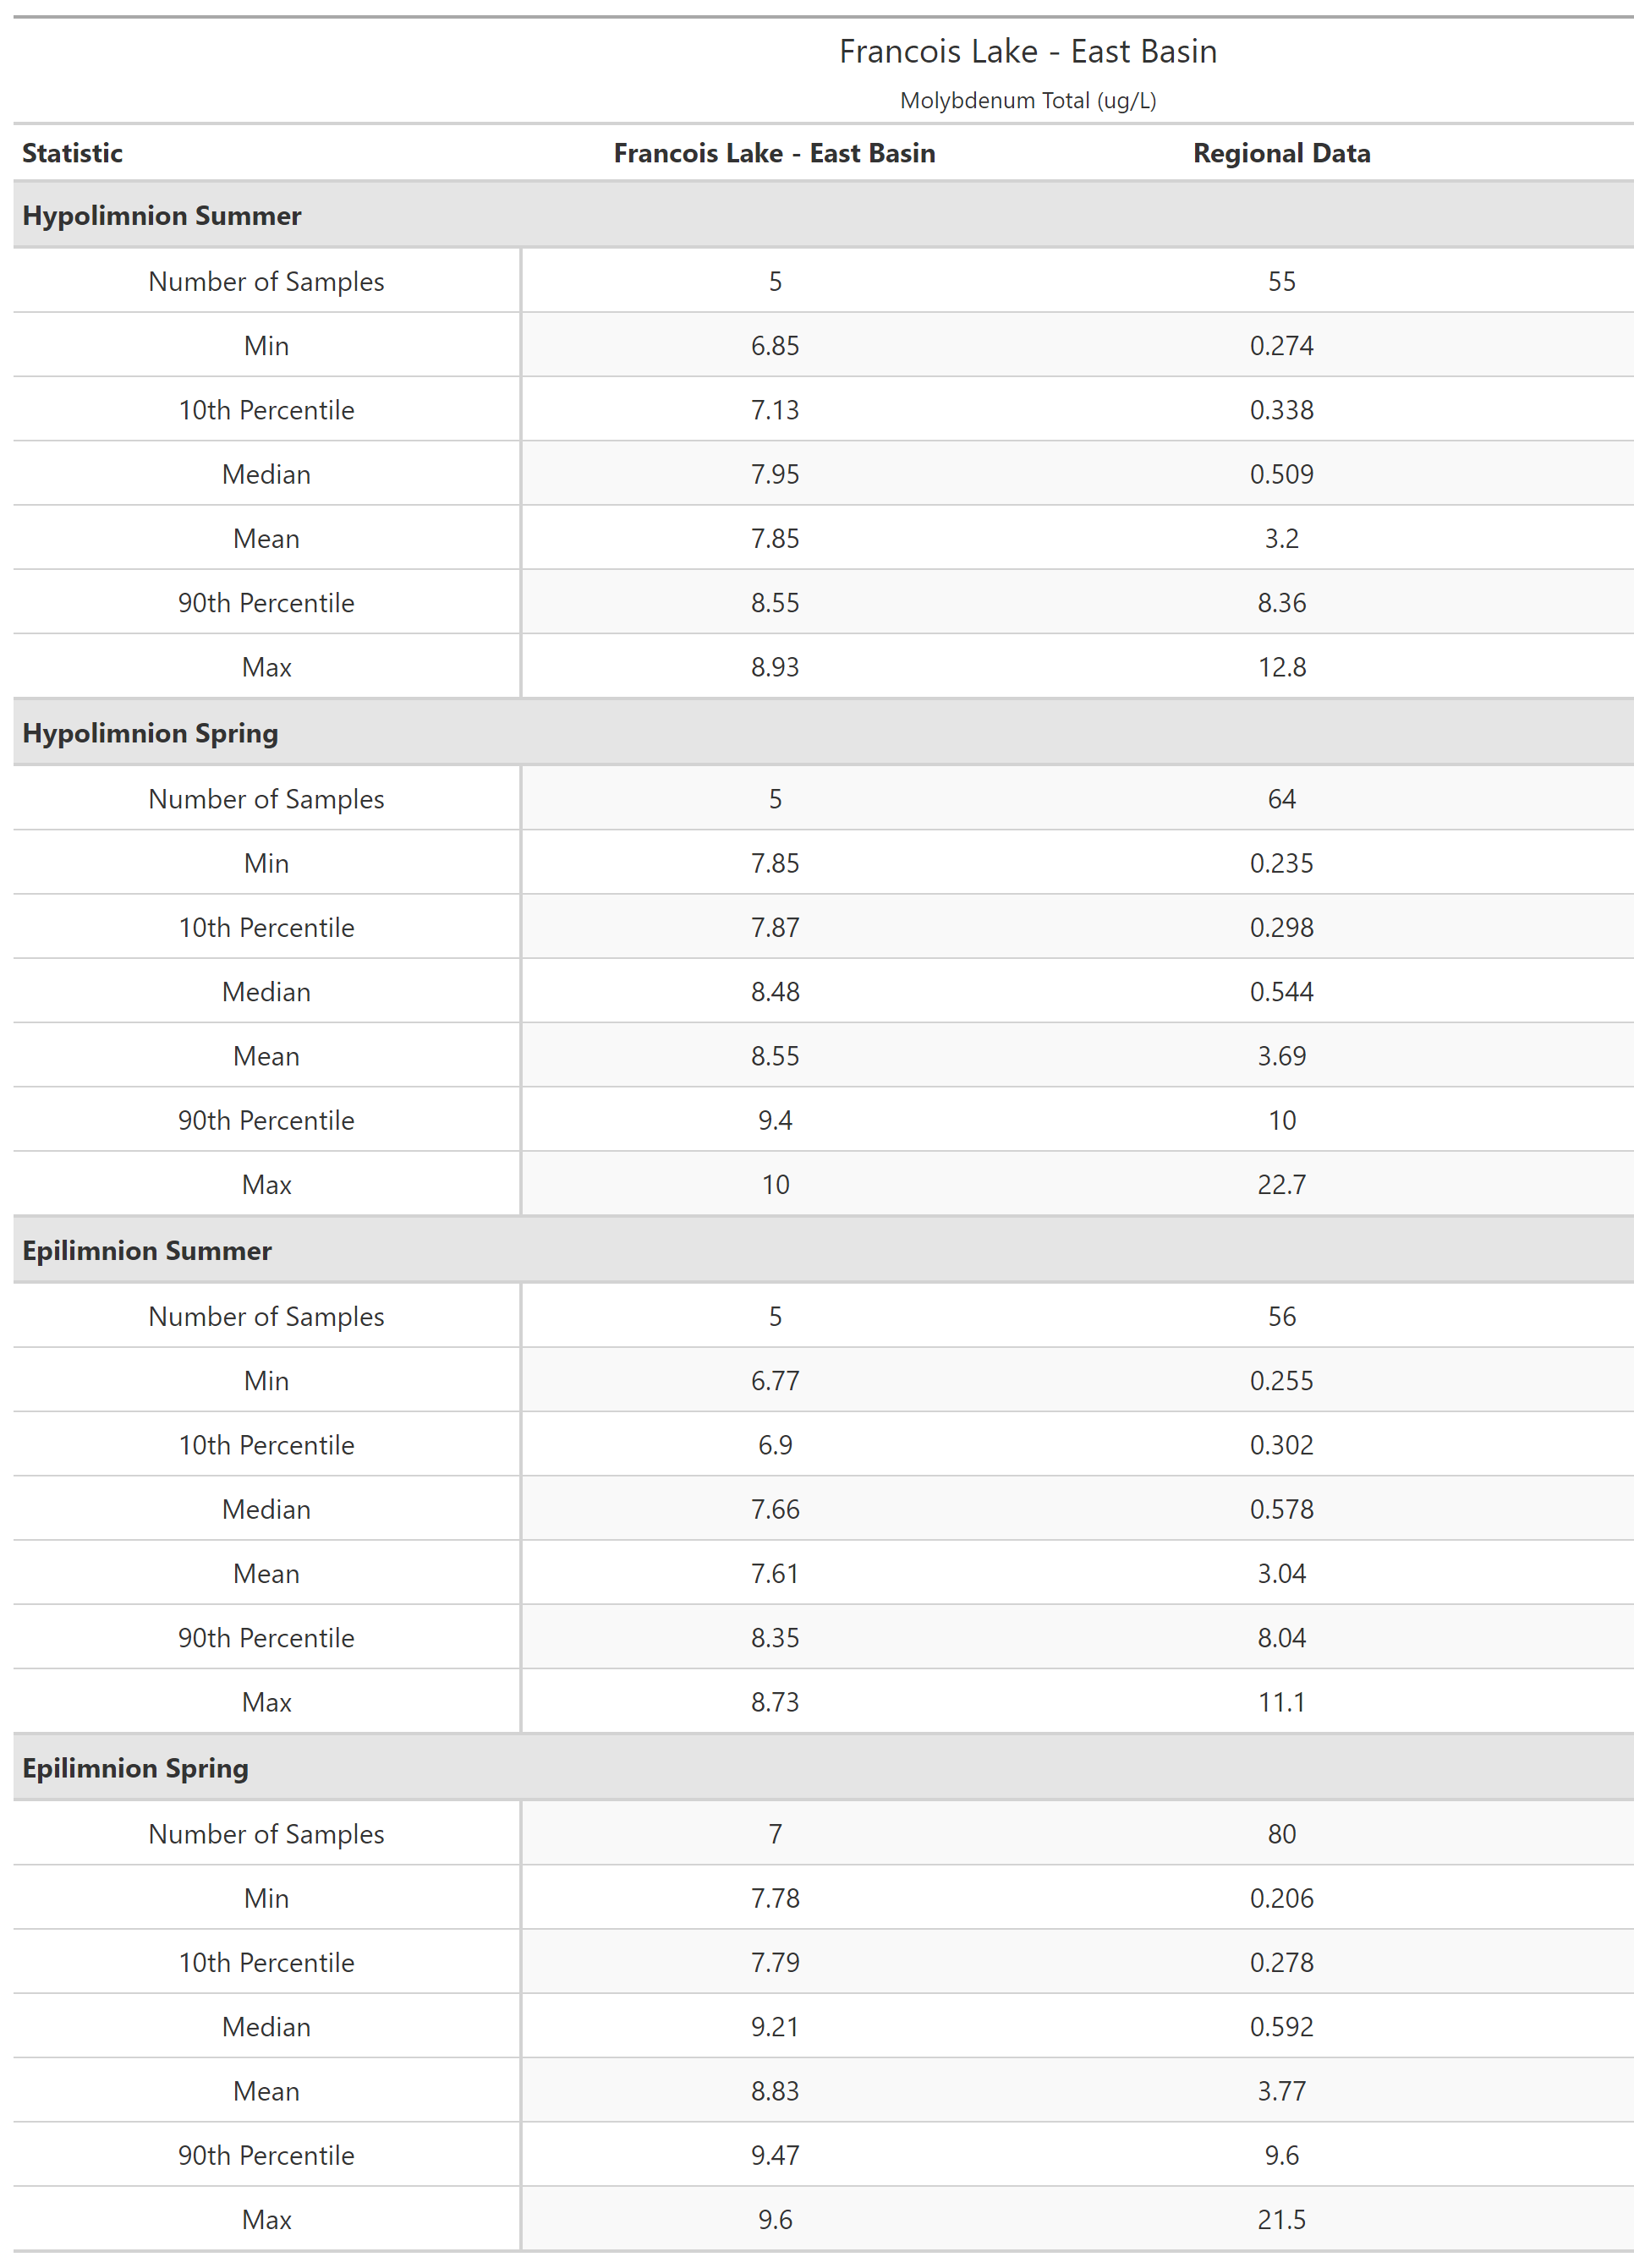 A table of summary statistics for Molybdenum Total with comparison to regional data